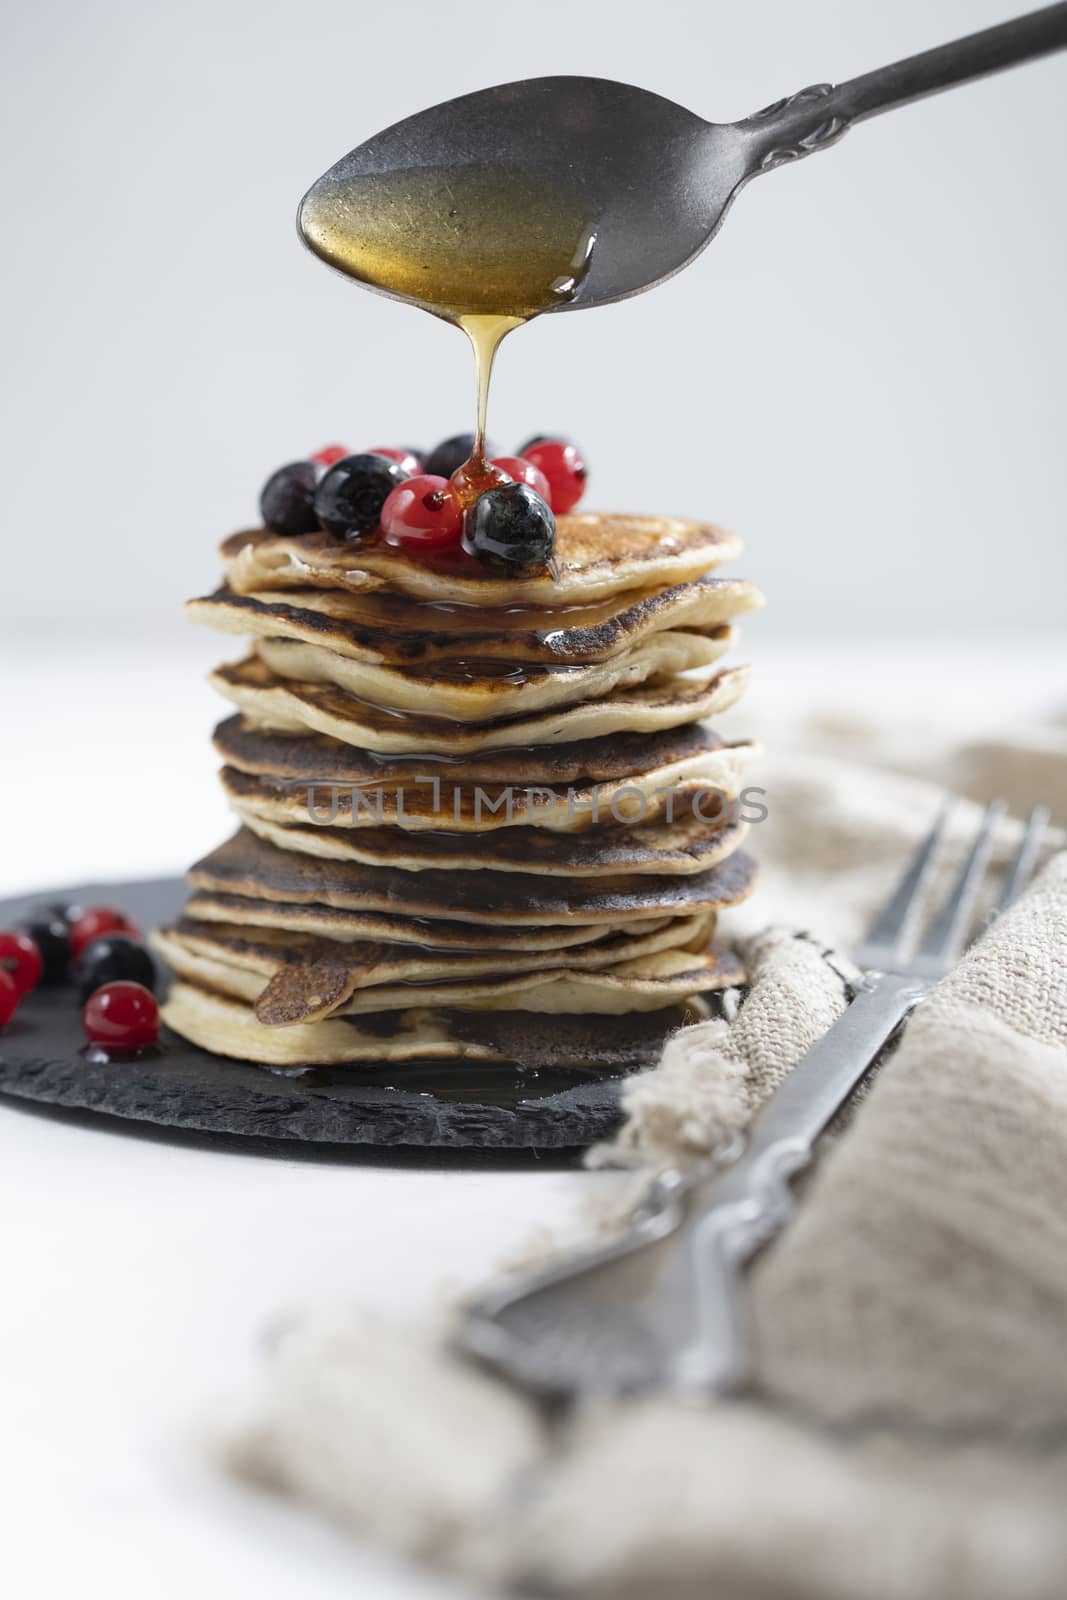 Plate with pancakes and berries on white table by sashokddt